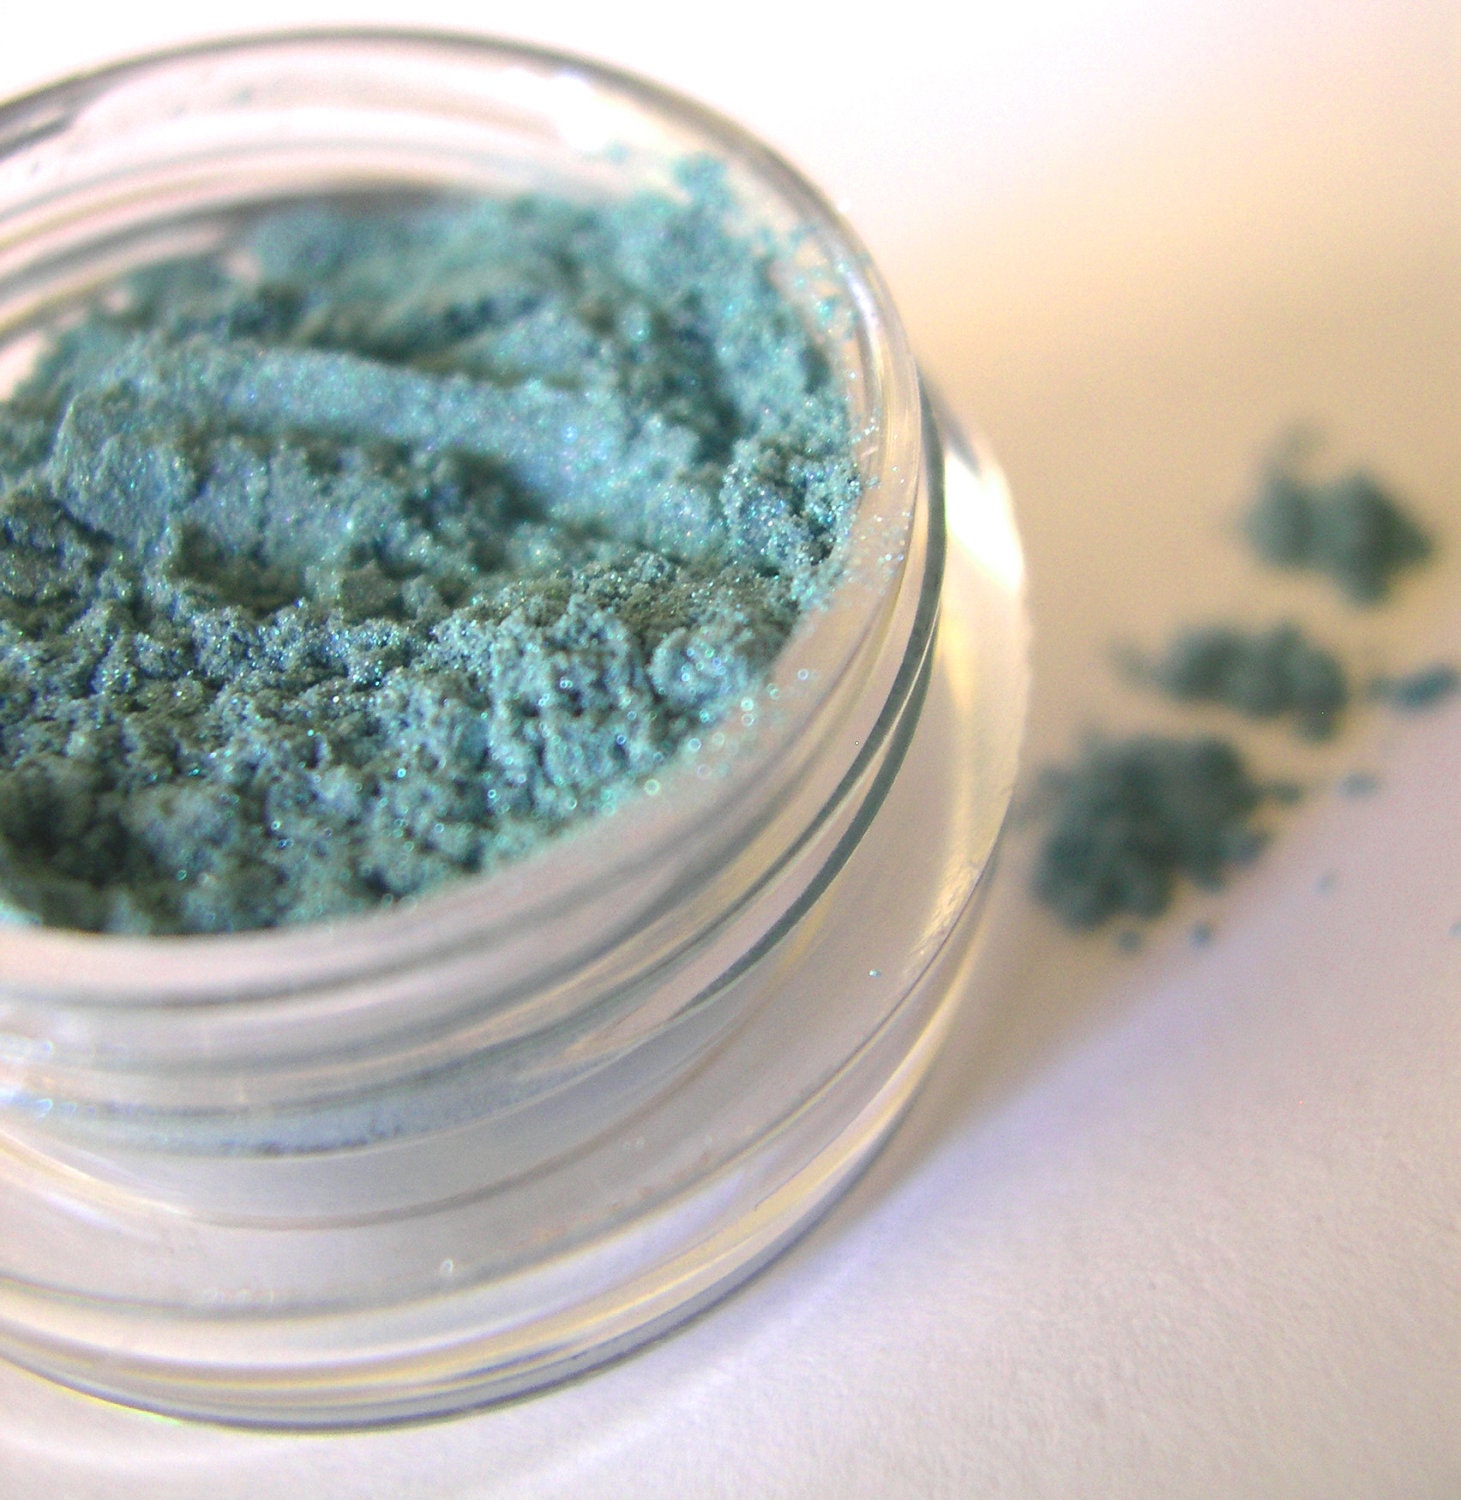 SEA GLASS - Mineral Eyeshadow Mineral Makeup Pure Natural Vegan Pigment Eye Color